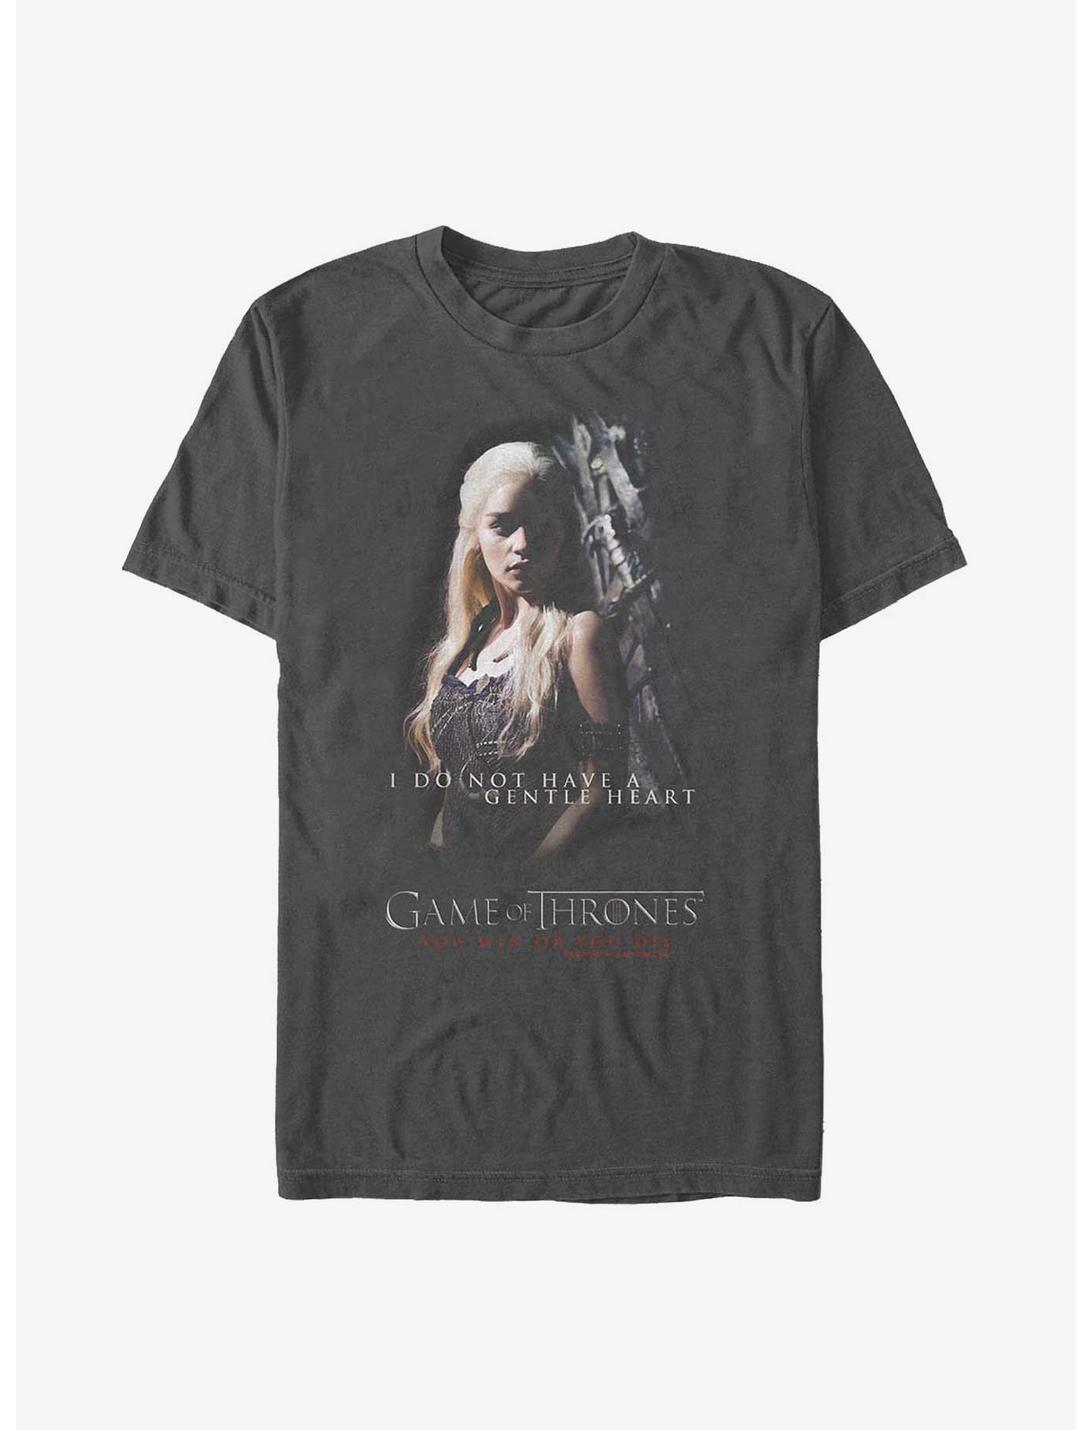 Game Of Thrones Daenerys No Gentle Heart T-Shirt, CHARCOAL, hi-res